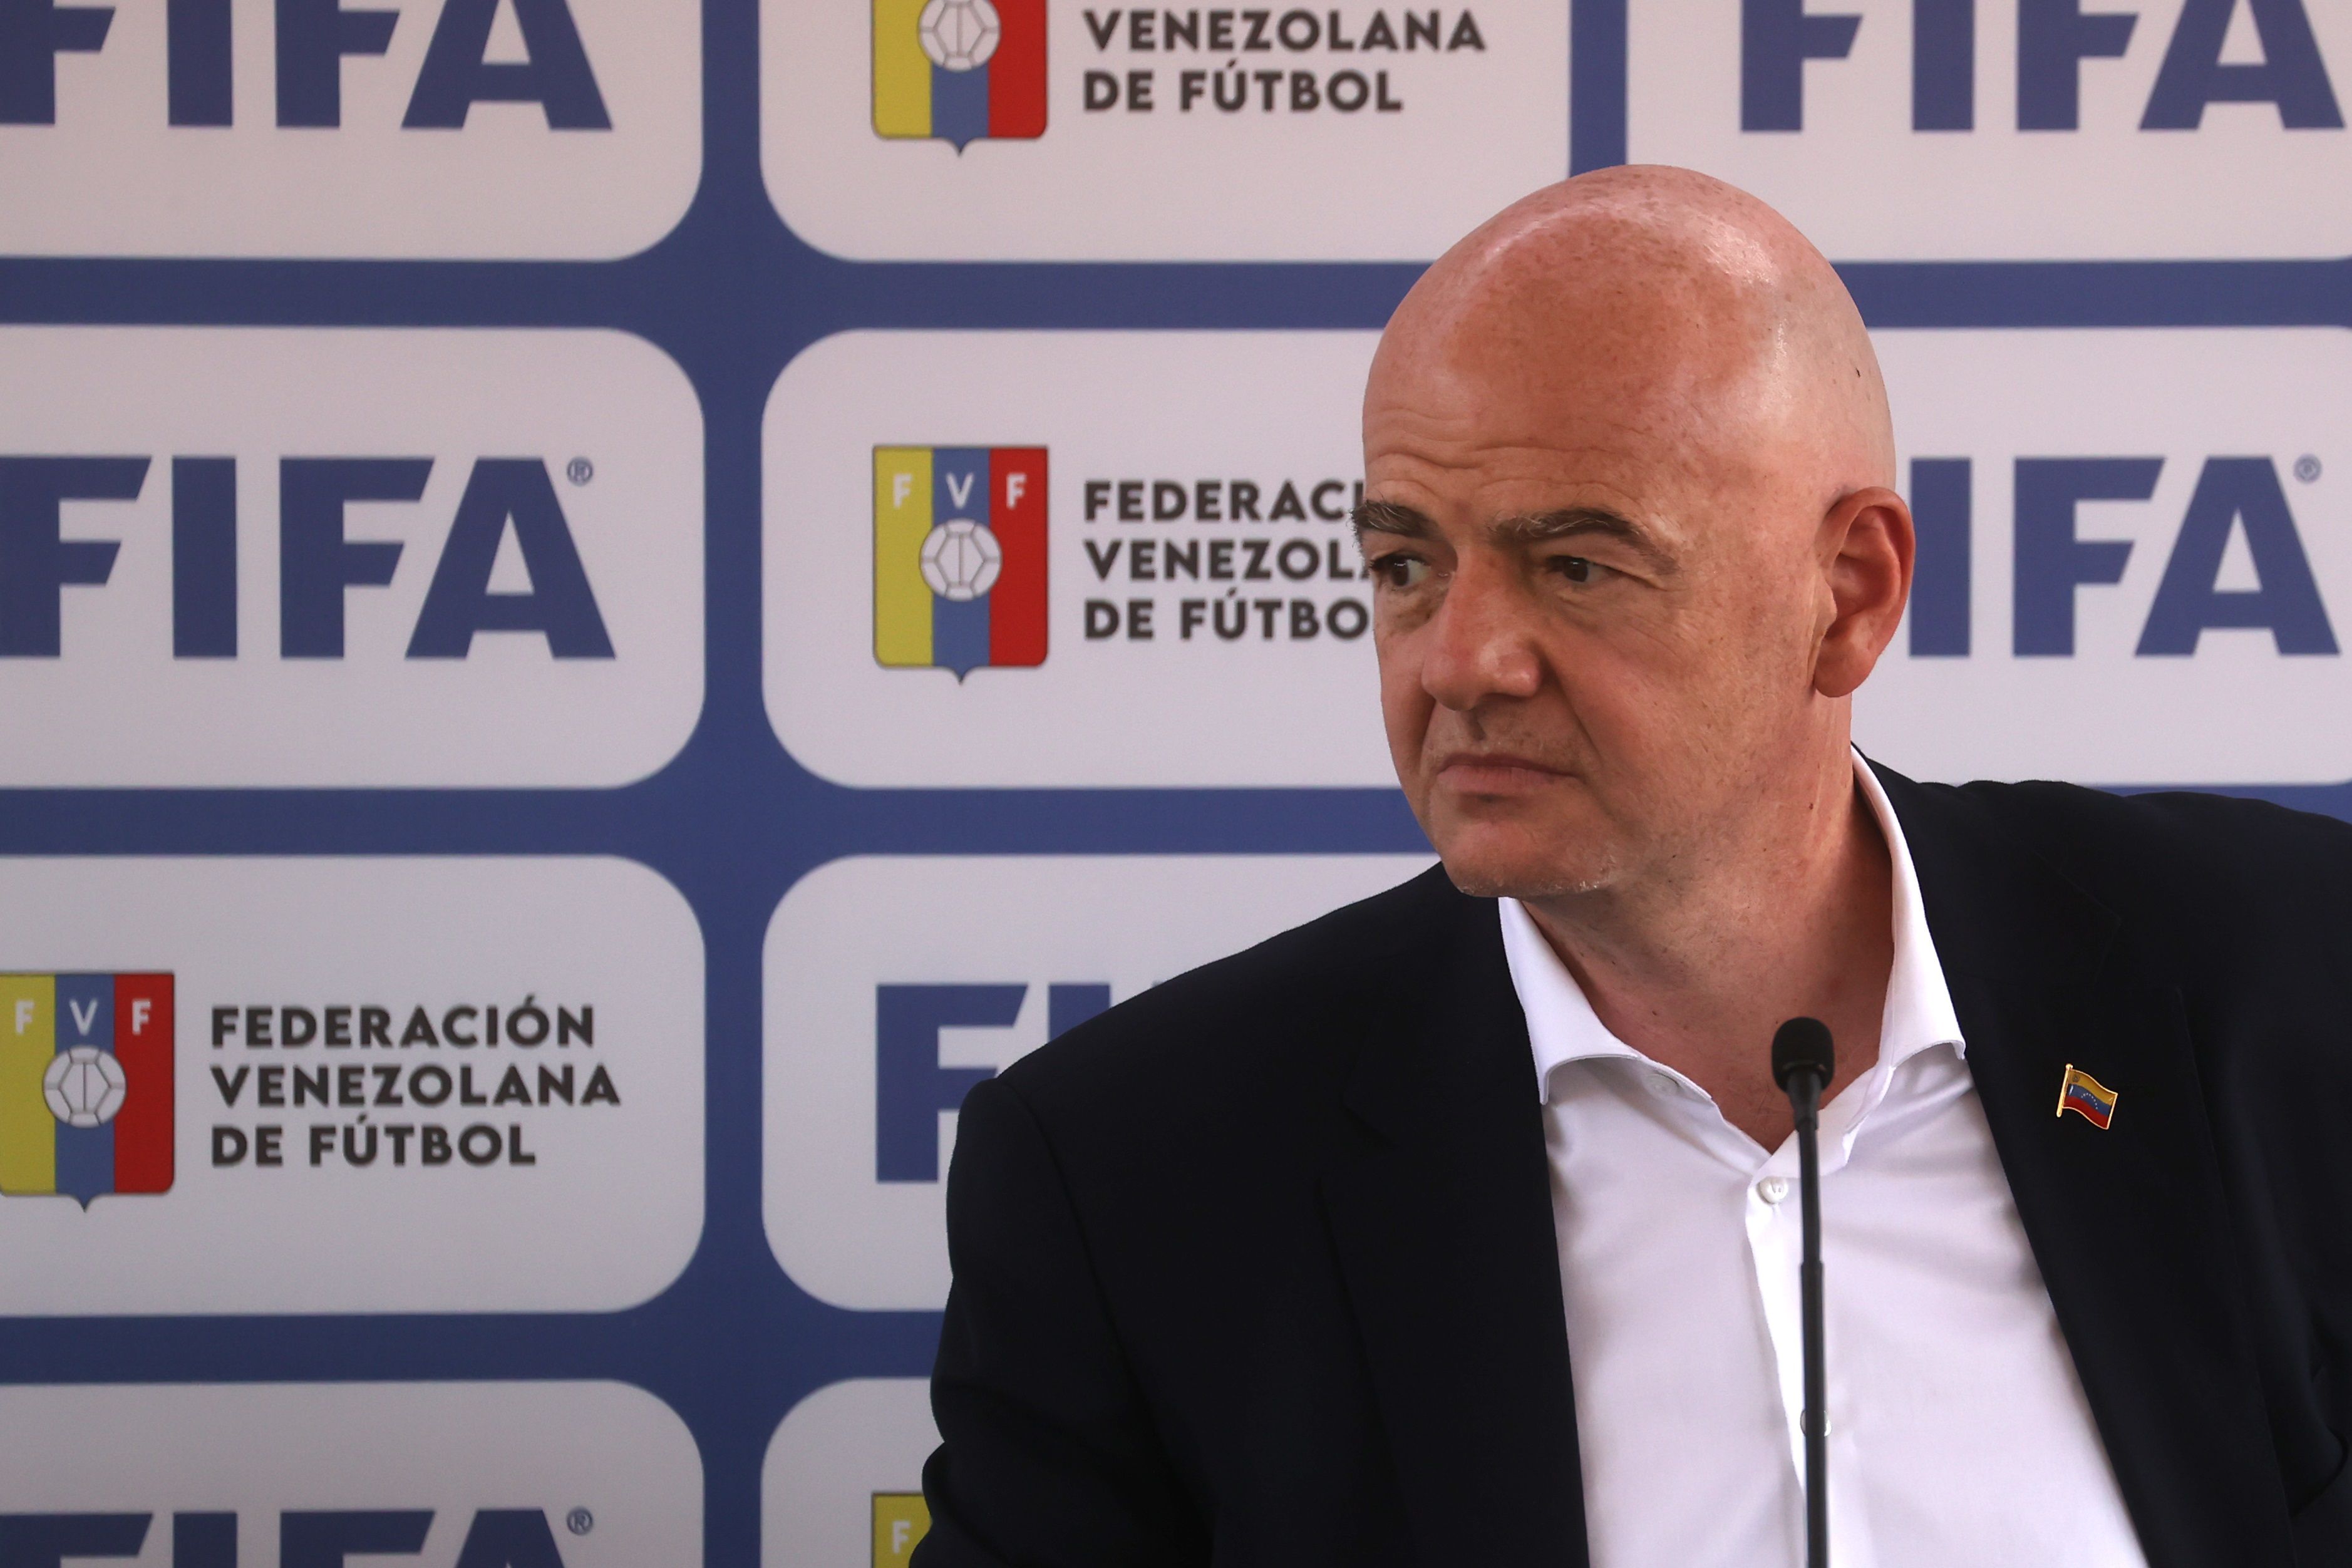 FIFA President Gianni Infantino shared his opinion on the homophobic cry (Photo: EFE / Miguel Gutiérrez)